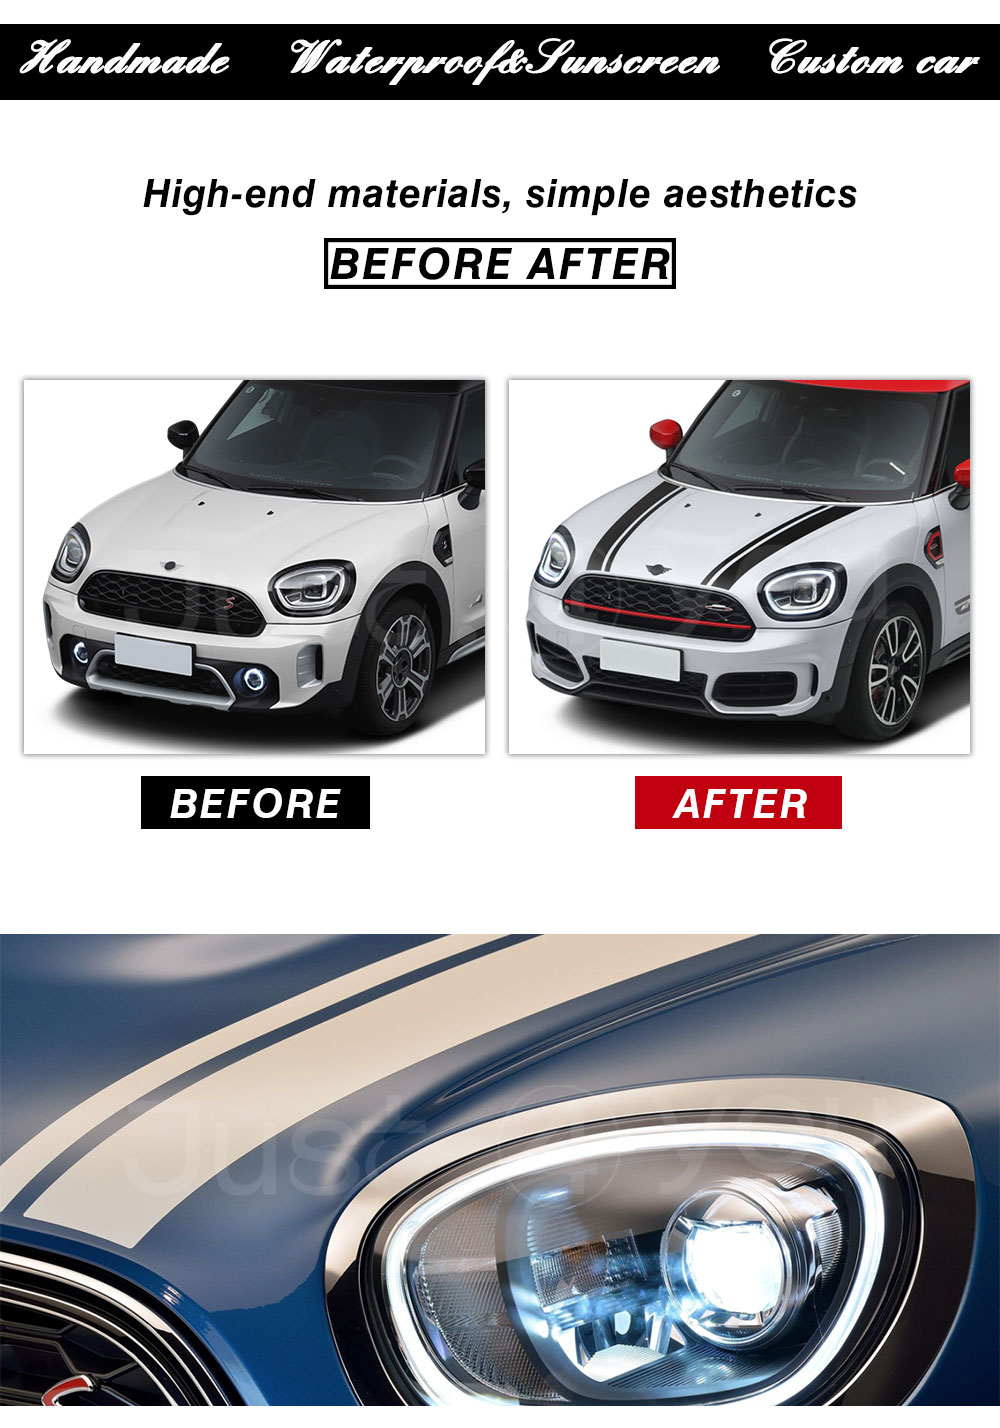 Car Hood Bonnet Stripes Decal Stickers for MINI Countryman Cooper S One ...